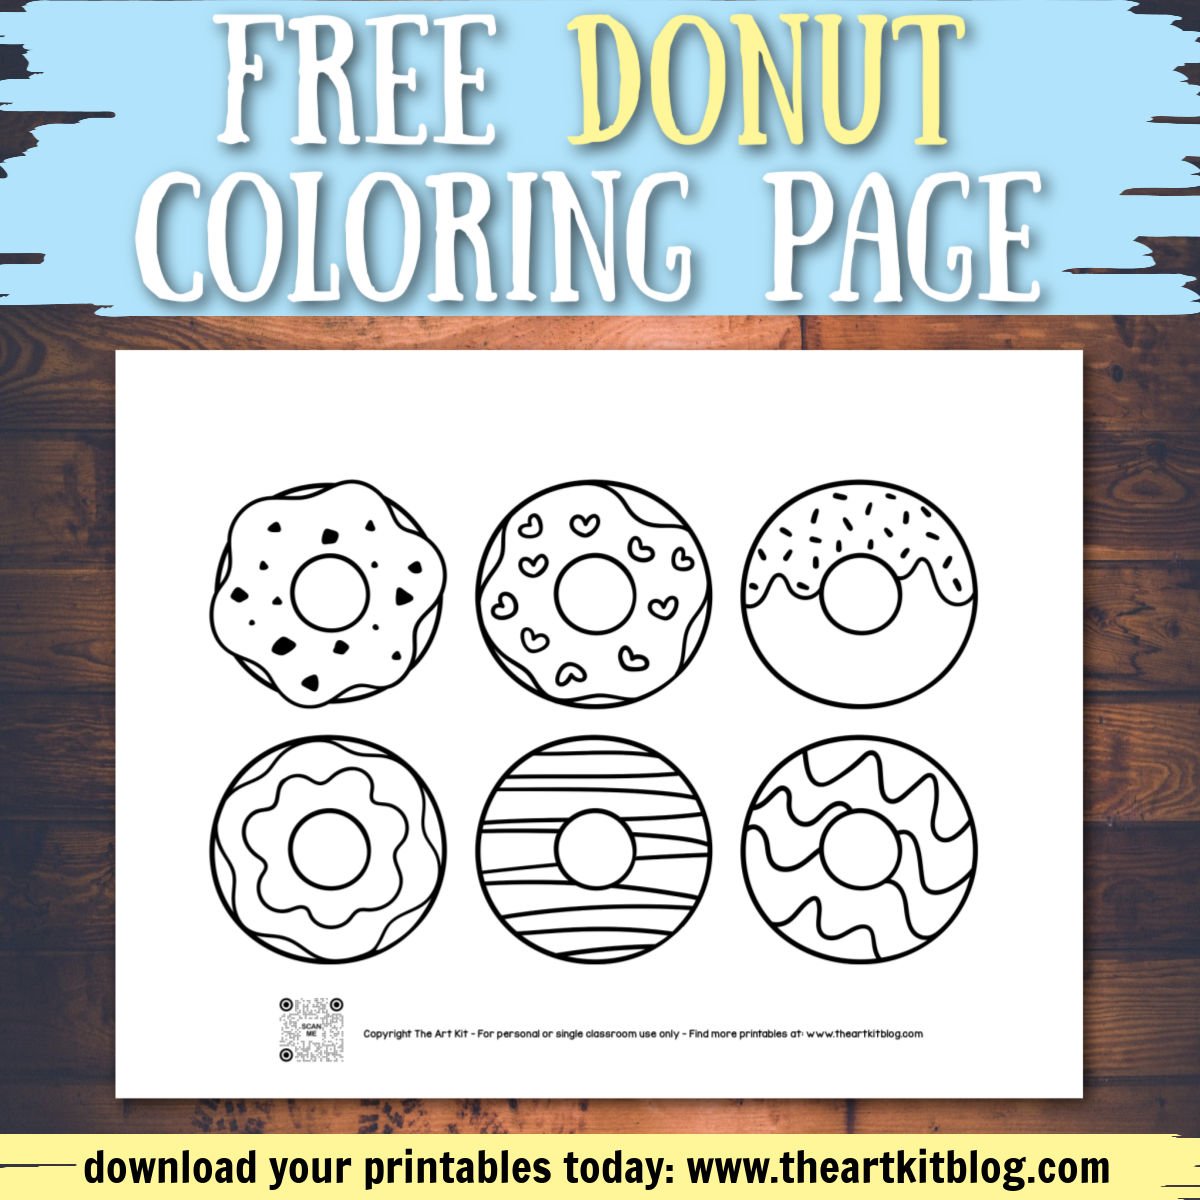 Cute donuts coloring page â the art kit